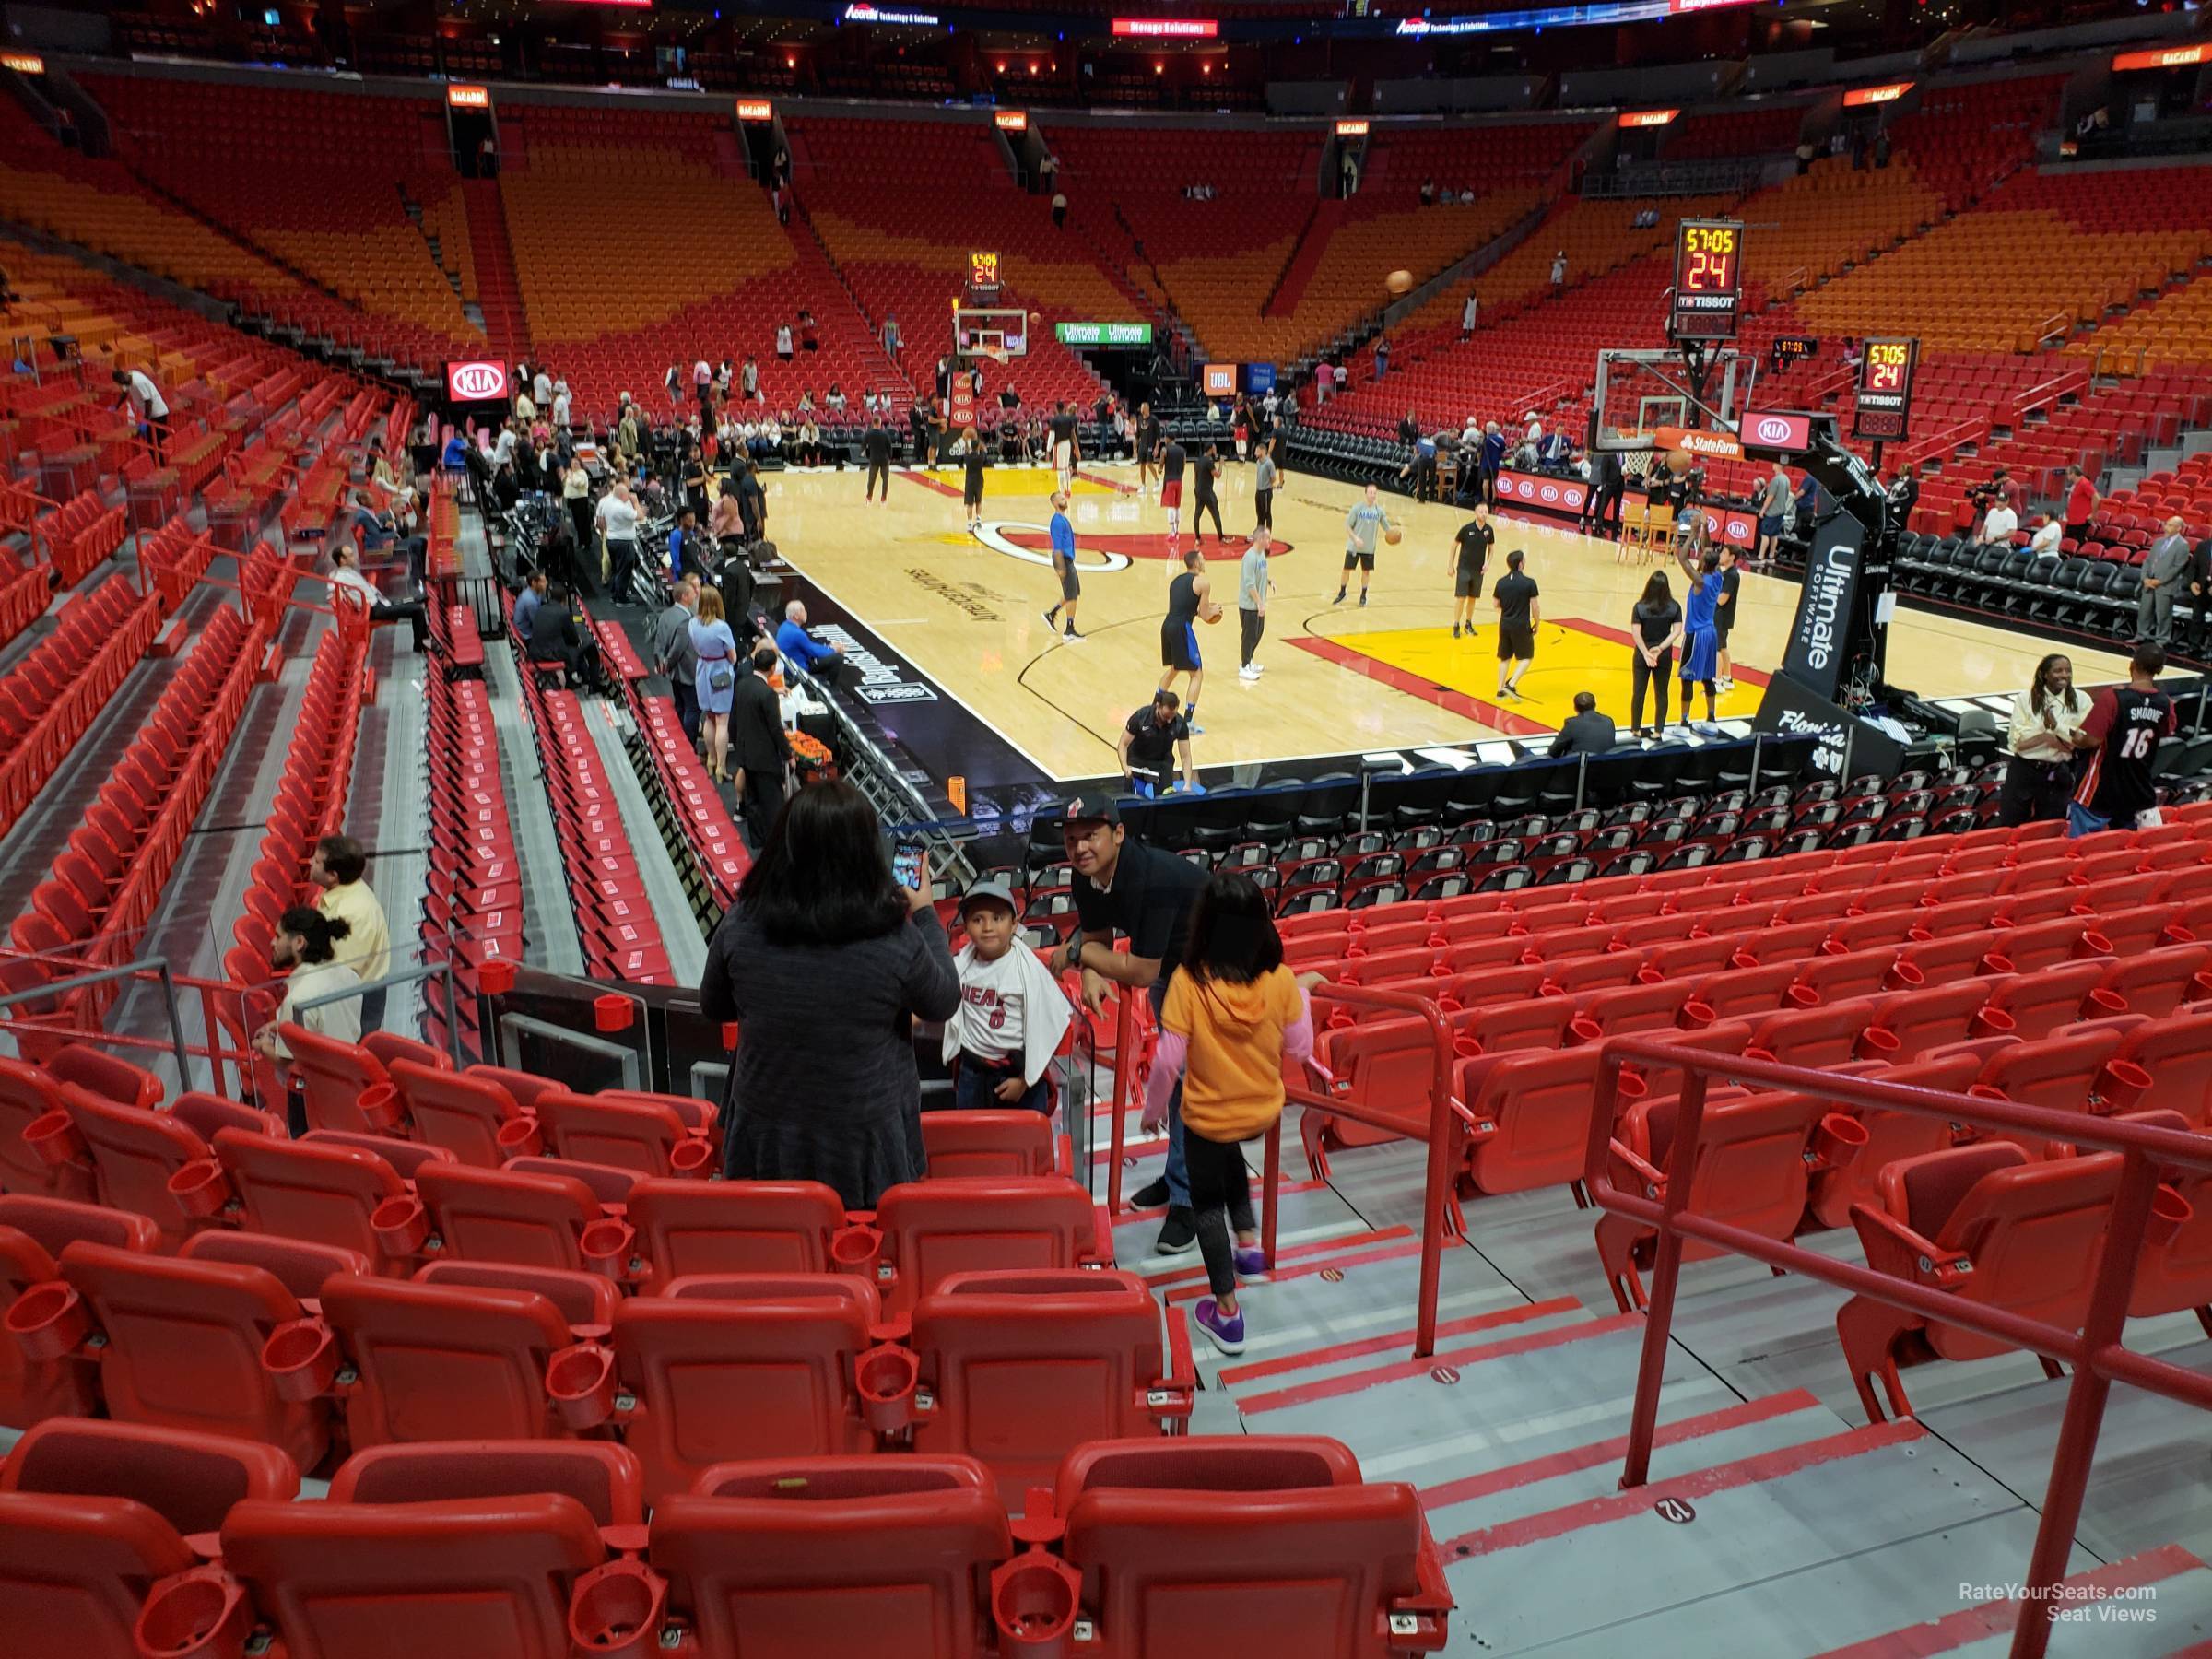 section 102, row 15 seat view  for basketball - ftx arena